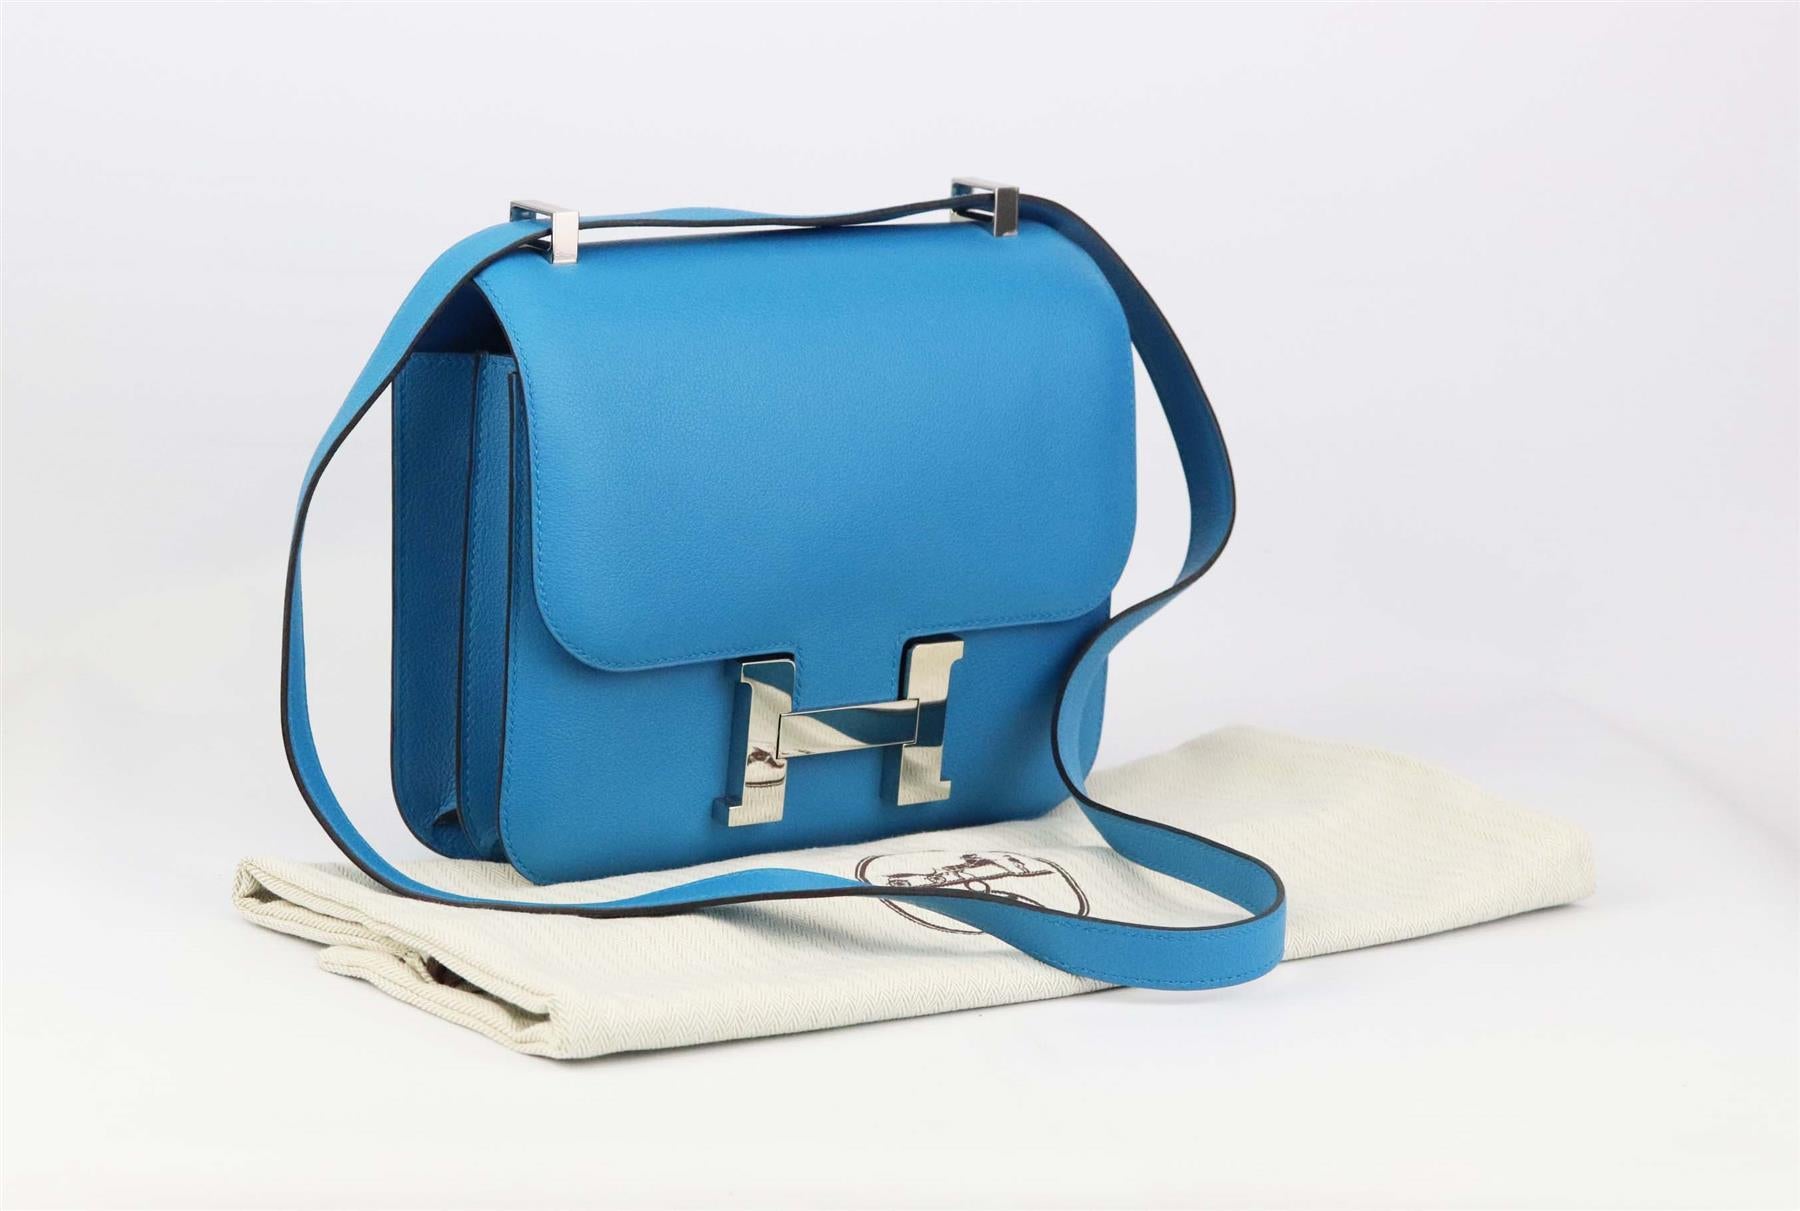 Made in France, this beautiful 2017 Hermès ‘Constance’ 23cm shoulder bag has been made from textured Epsom leather exterior in a blue hue and soft leather interior, it is decorated with palladium hardware on the front and finished with a flat